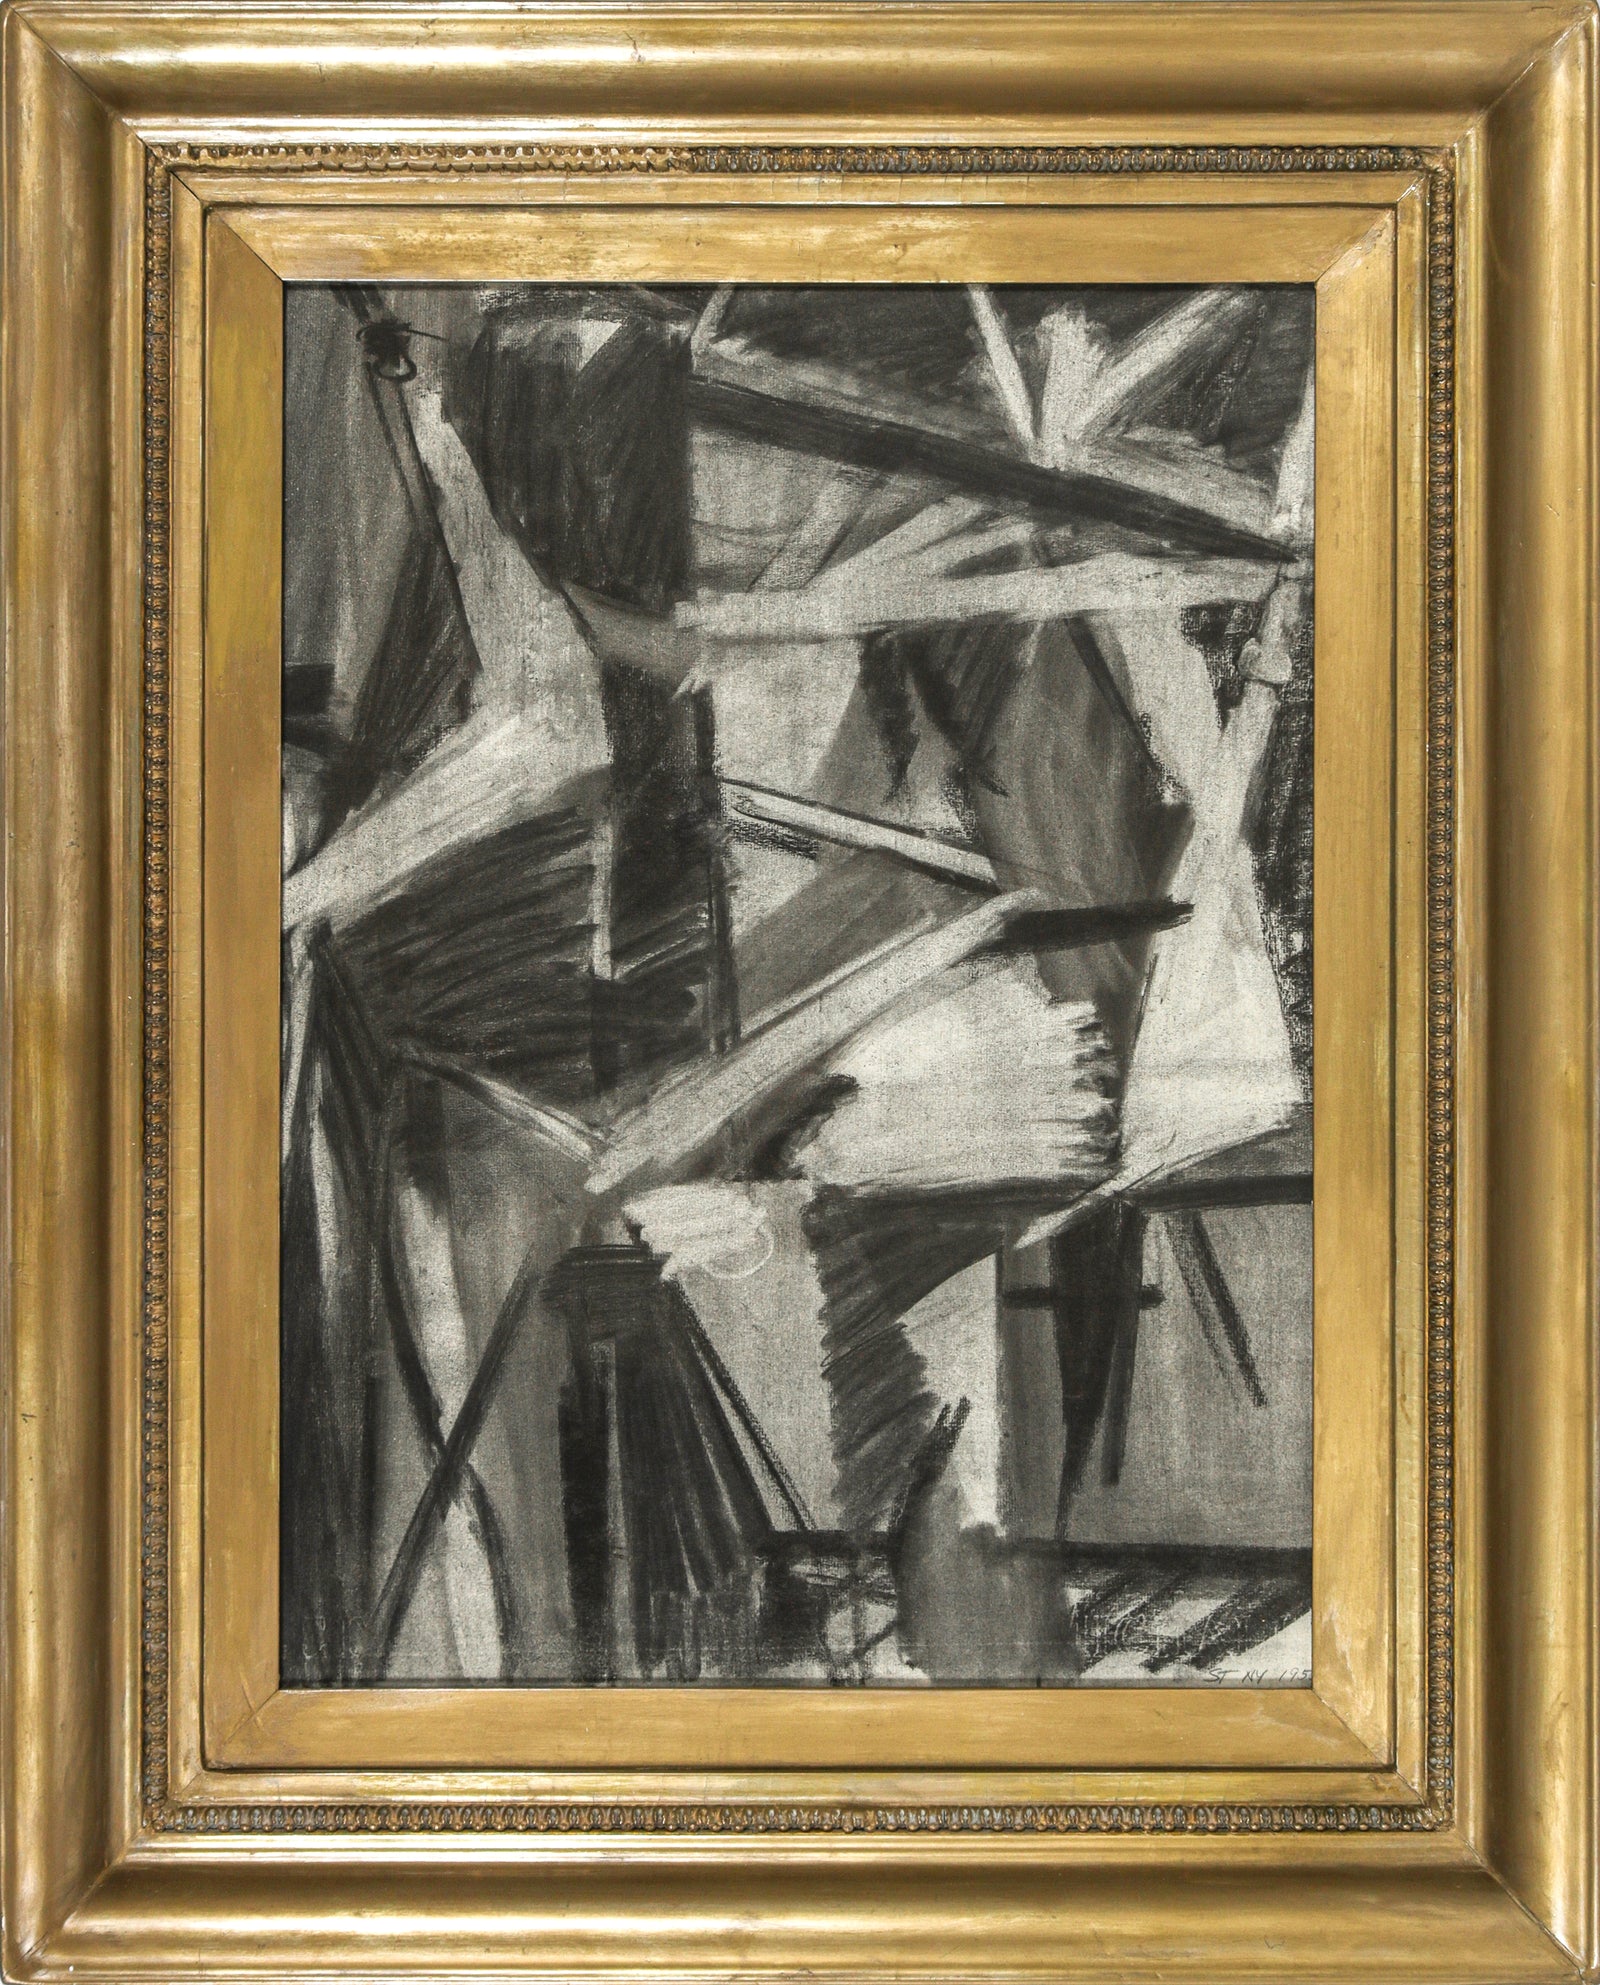 Monochrome Cubist Abstract <br>1950 Charcoal <br><br>#66814